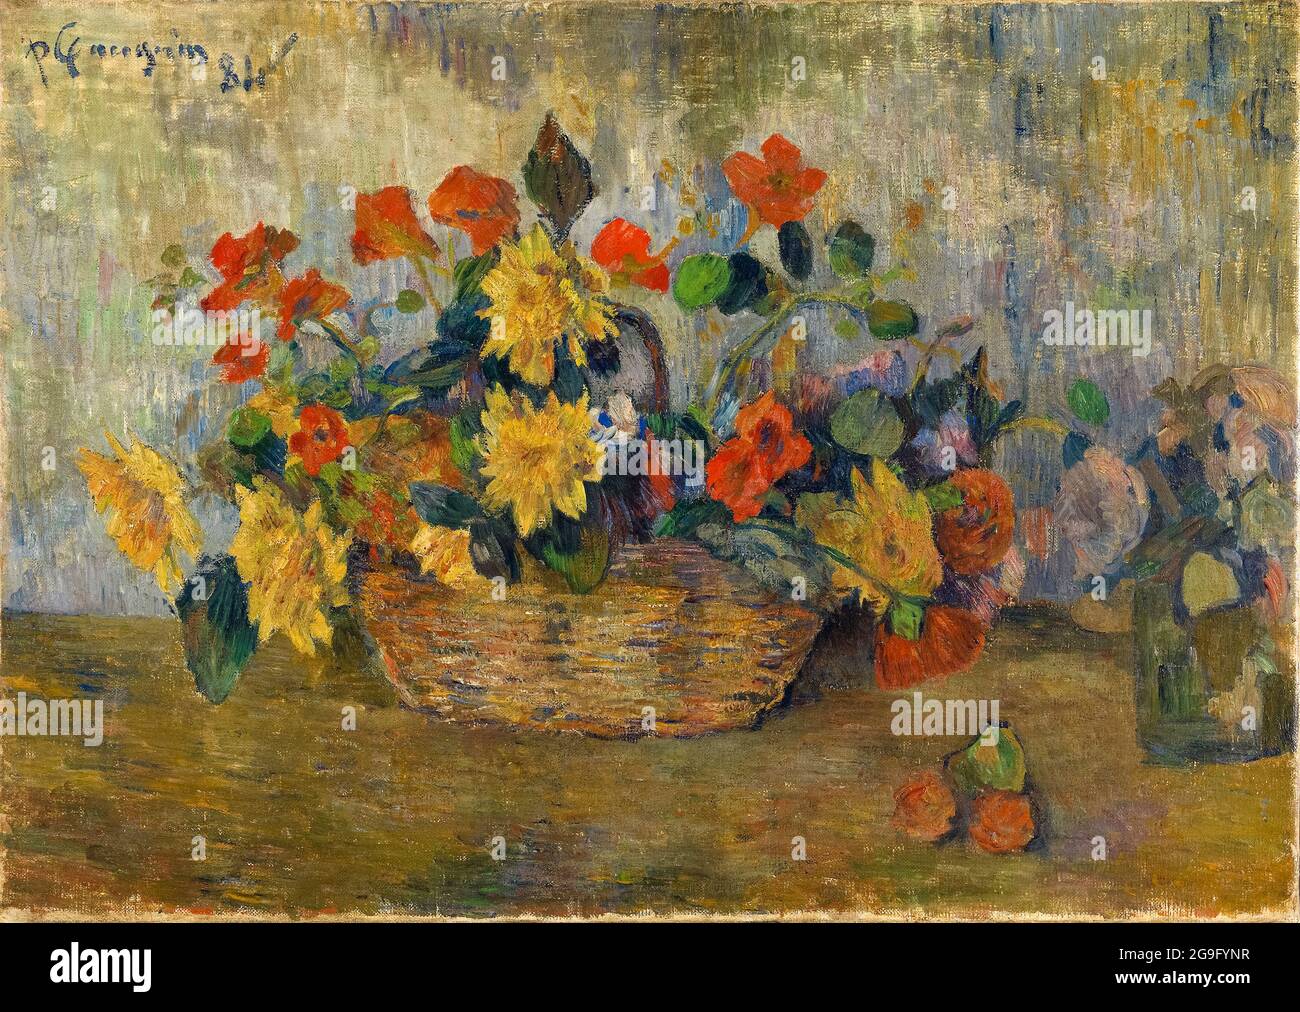 Paul Gauguin, Untitled, (Basket of flowers), still life painting, 1884 Stock Photo